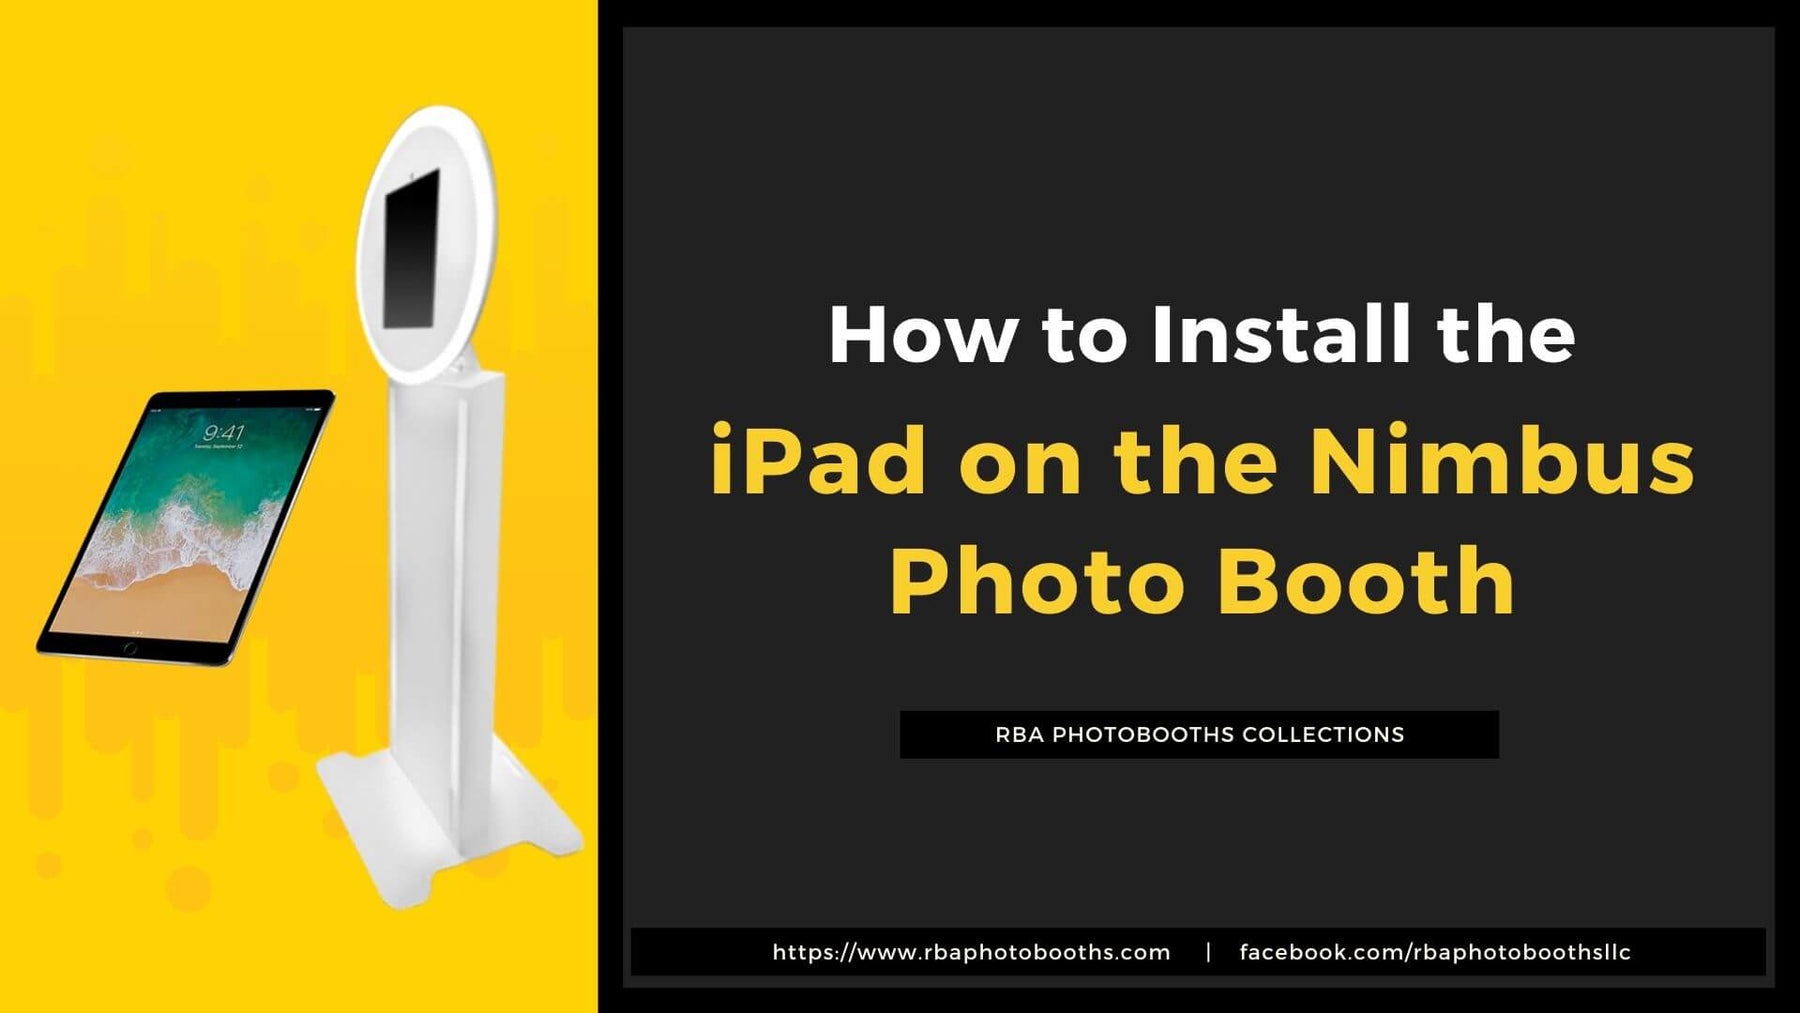 How to Install the iPad on the Nimbus Photo Booth